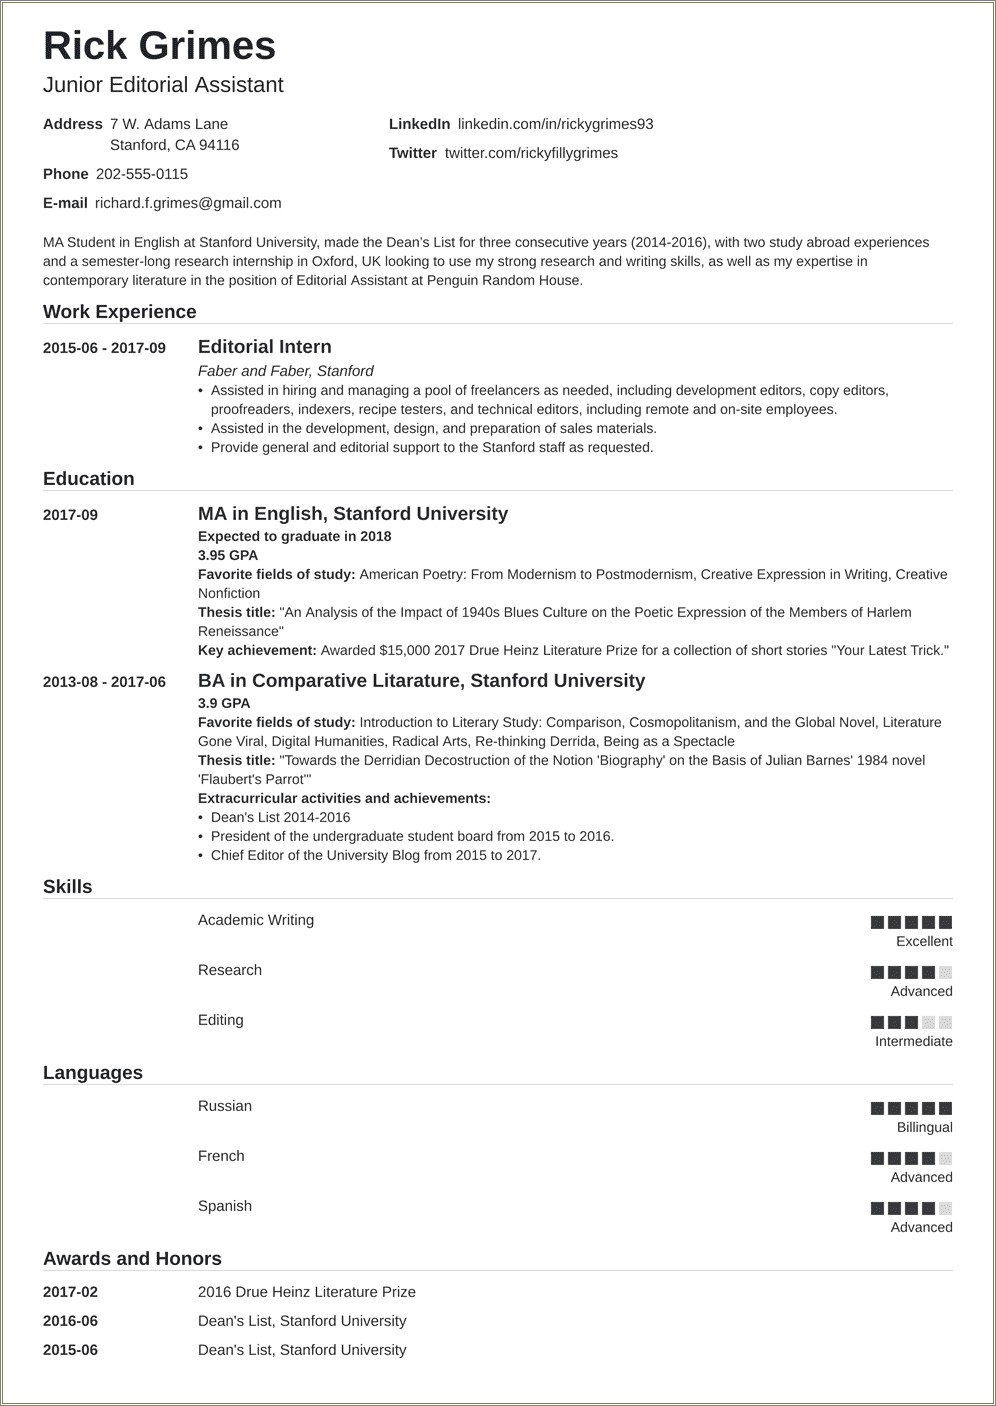 Resume Objective Seeking An Entry Level Position